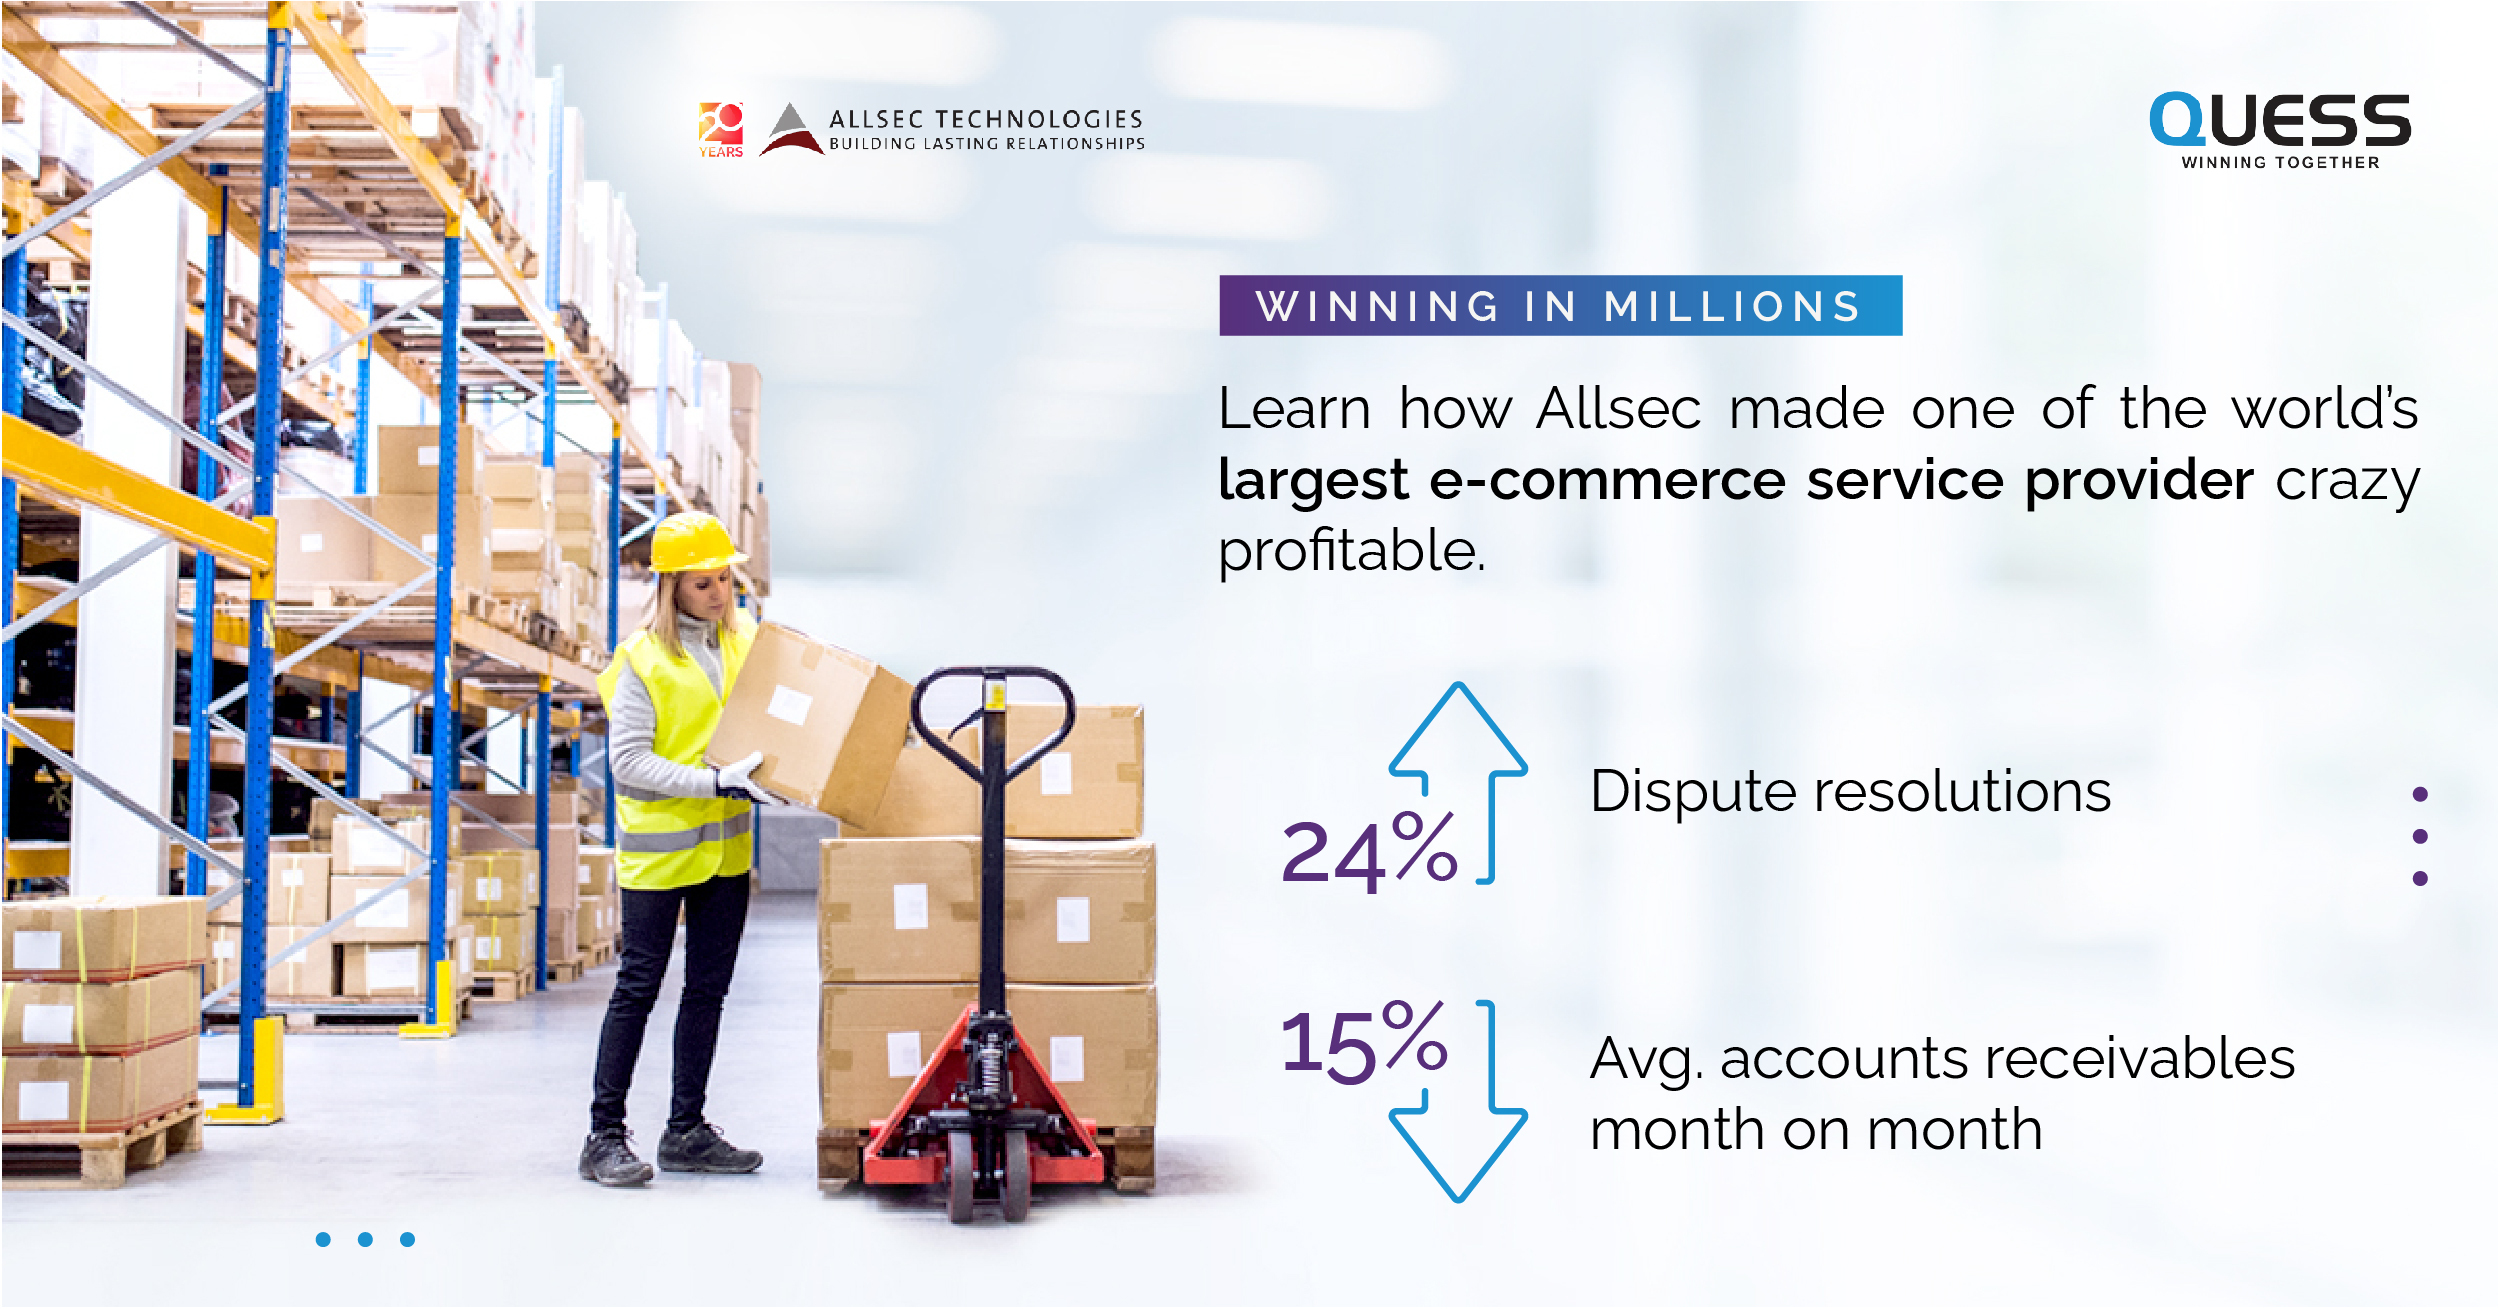 Winning in millions AP/AR services case study